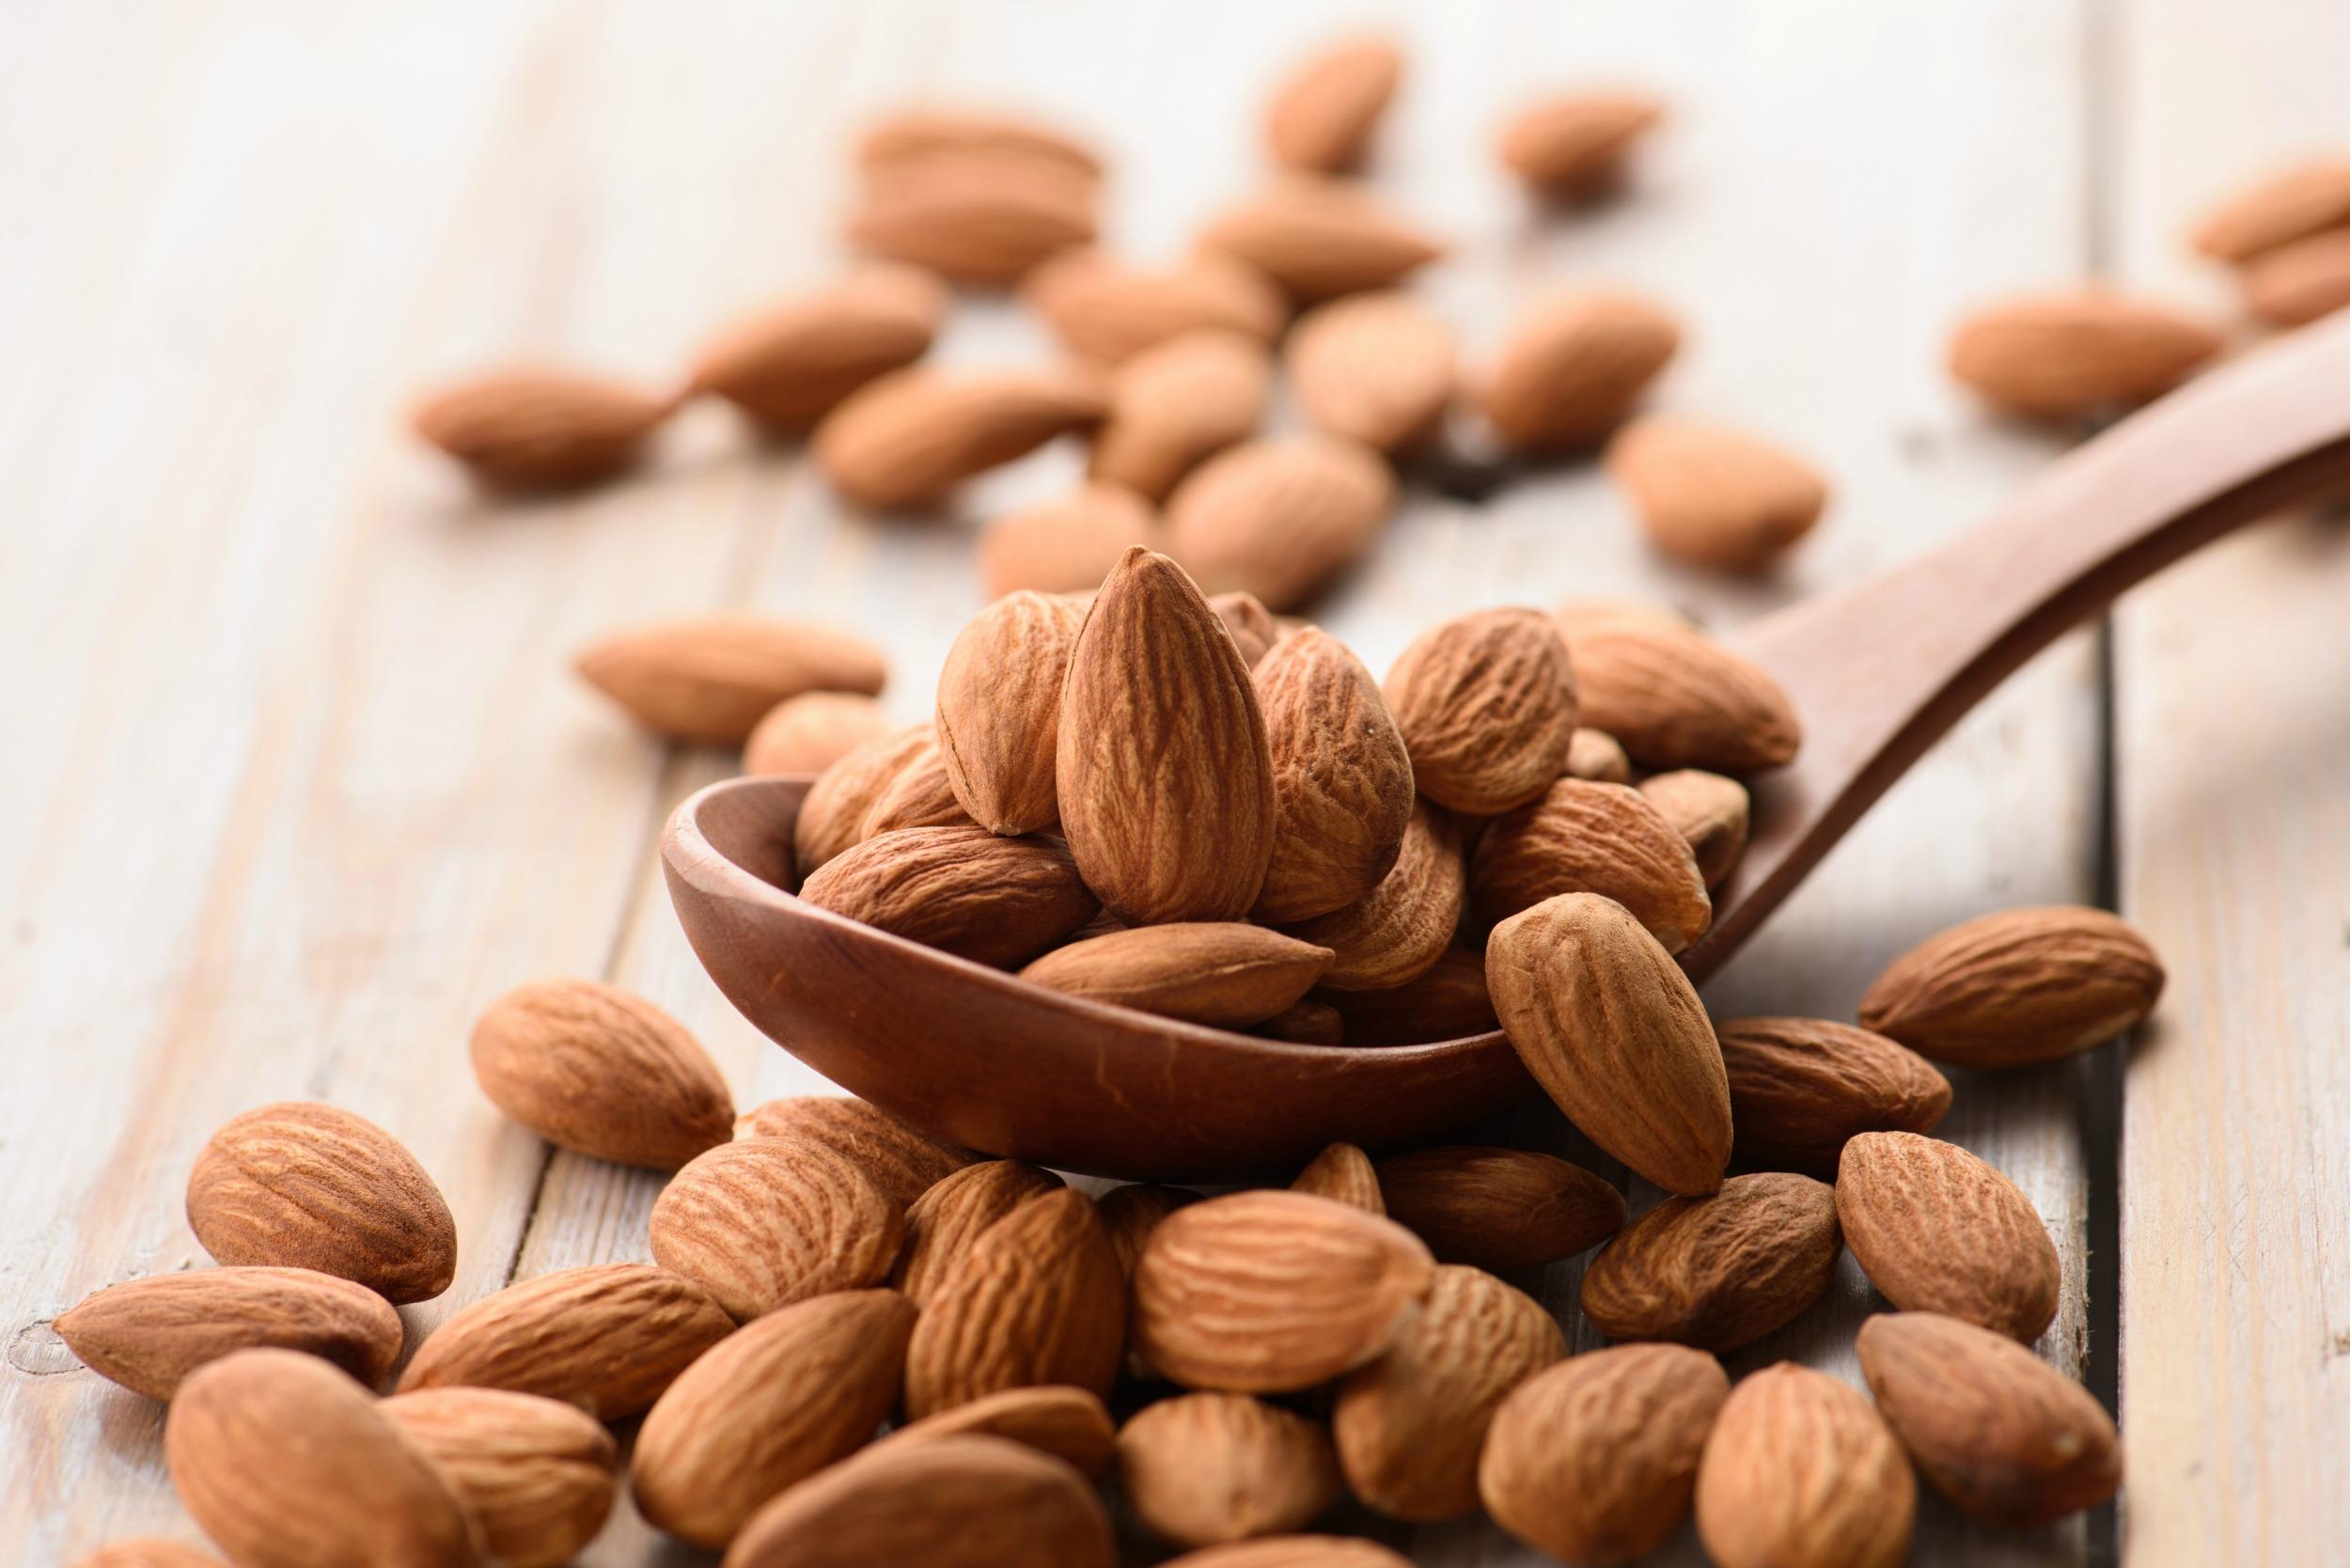 1K Almonds Pictures  Download Free Images on Unsplash